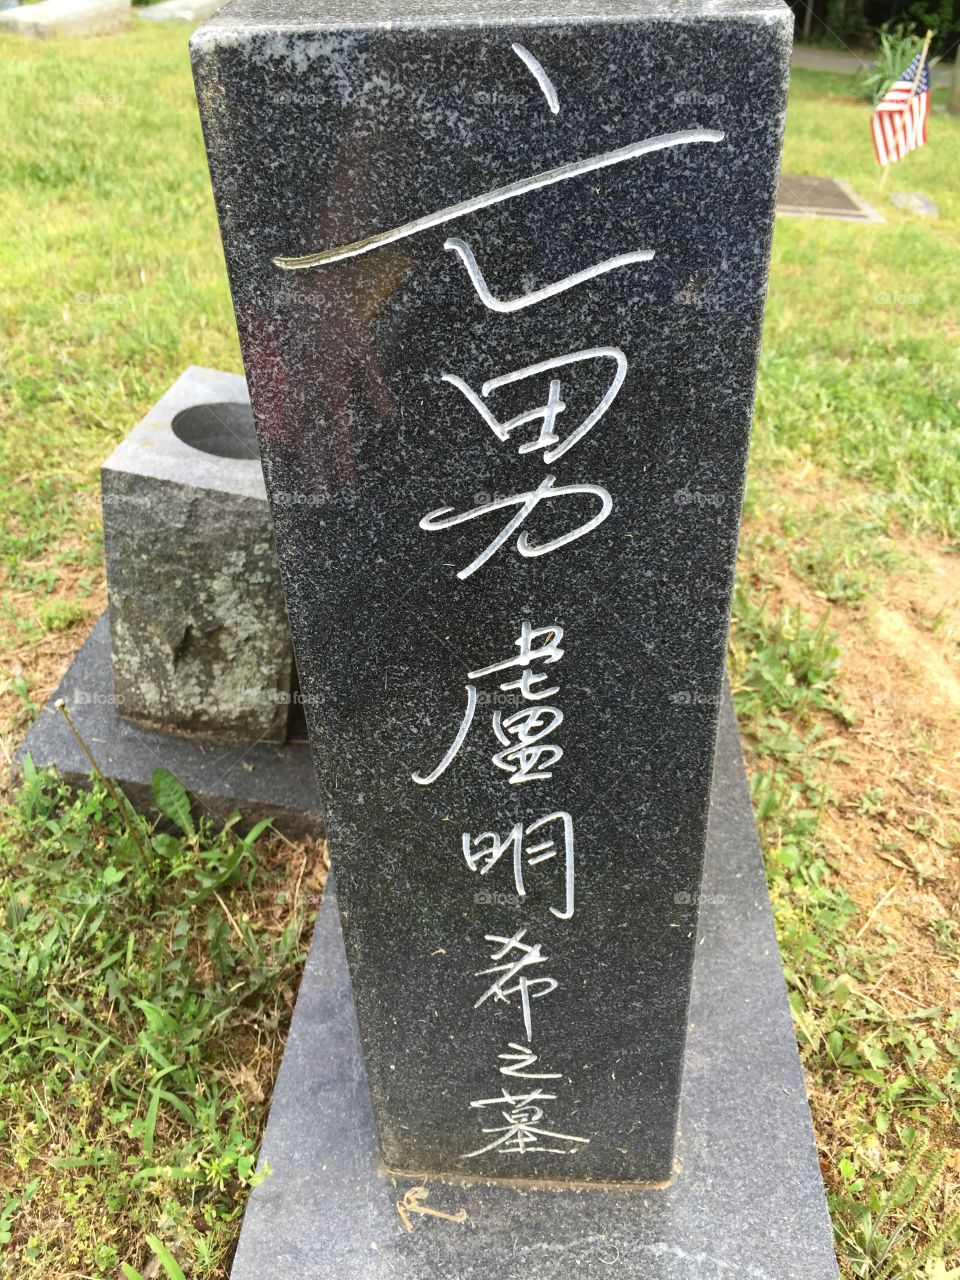 Japanese tombstone. This tombstone writing was on the side of a monument to a Japanese man who served in WWII